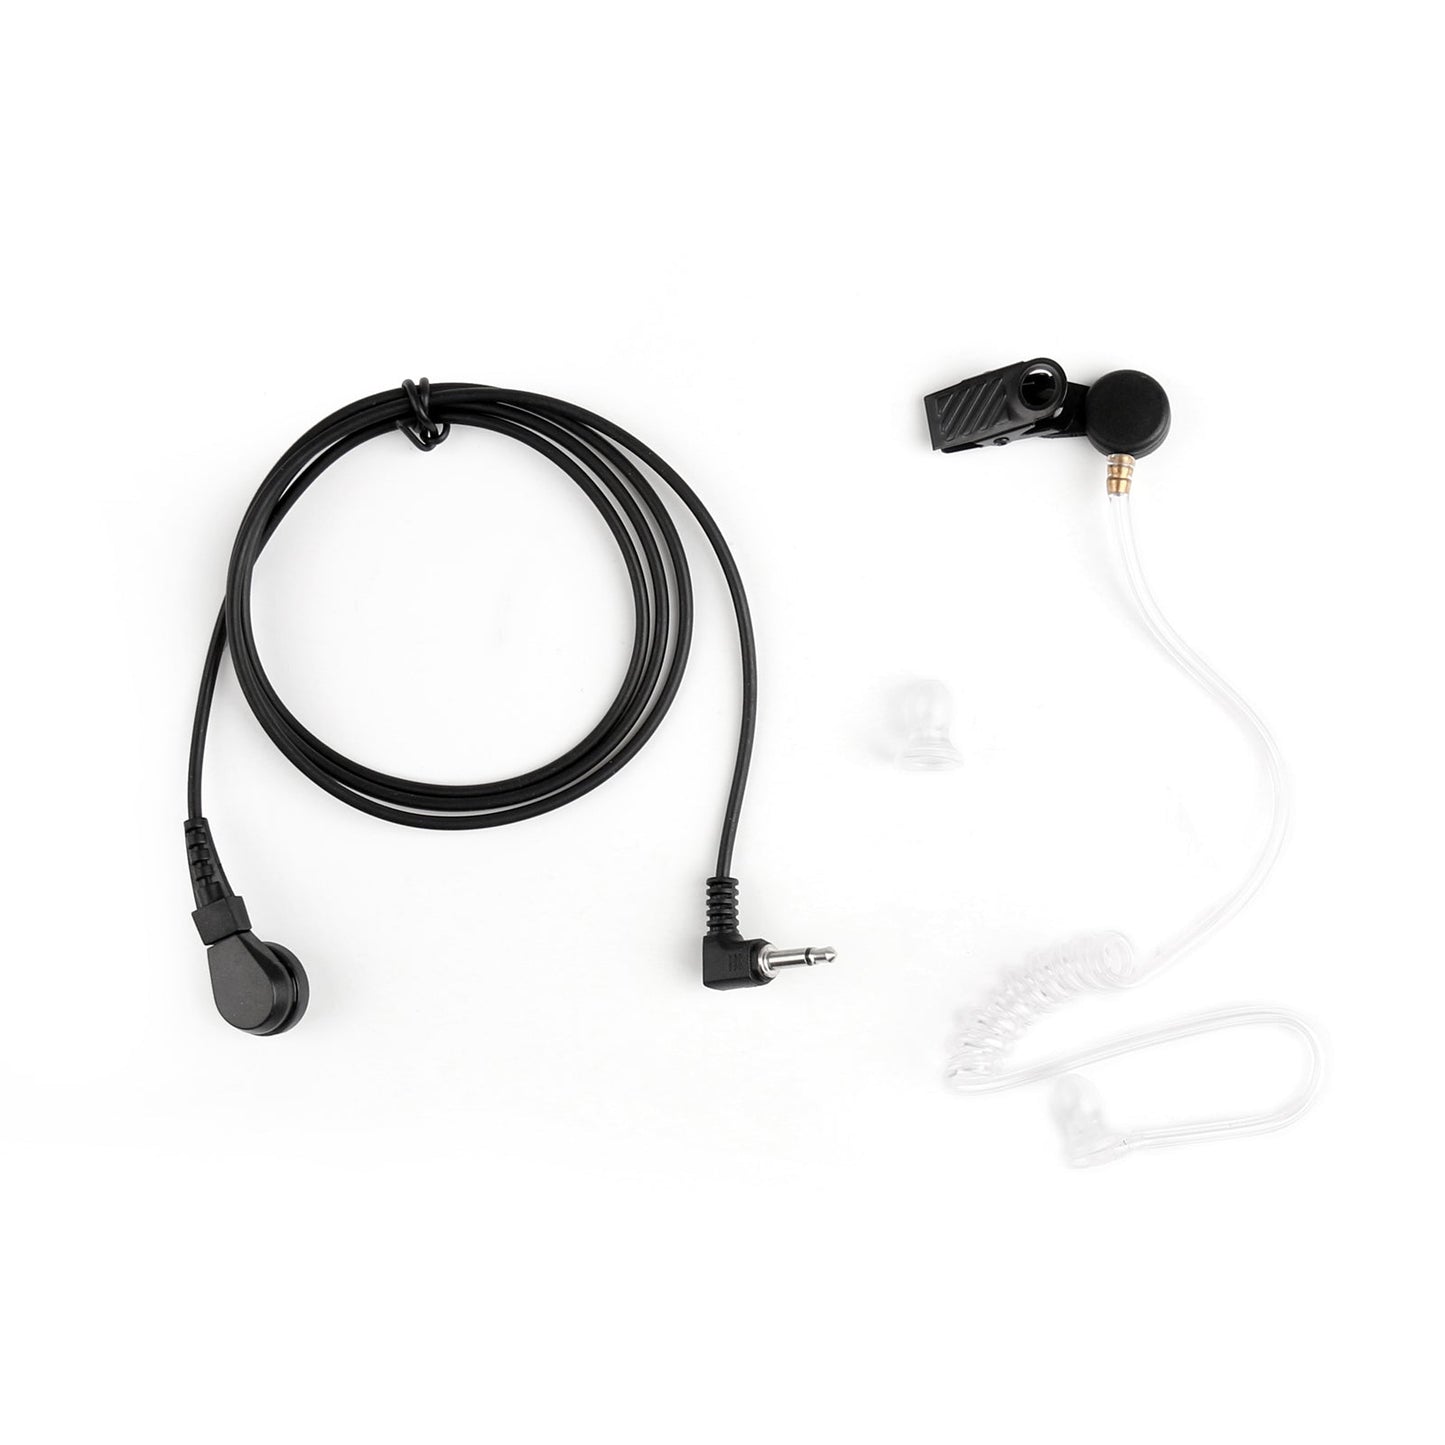 1Pcs 3.5mm Listen Only Security Covert Acoustic Tube Headset For MP3 MP4 Phone